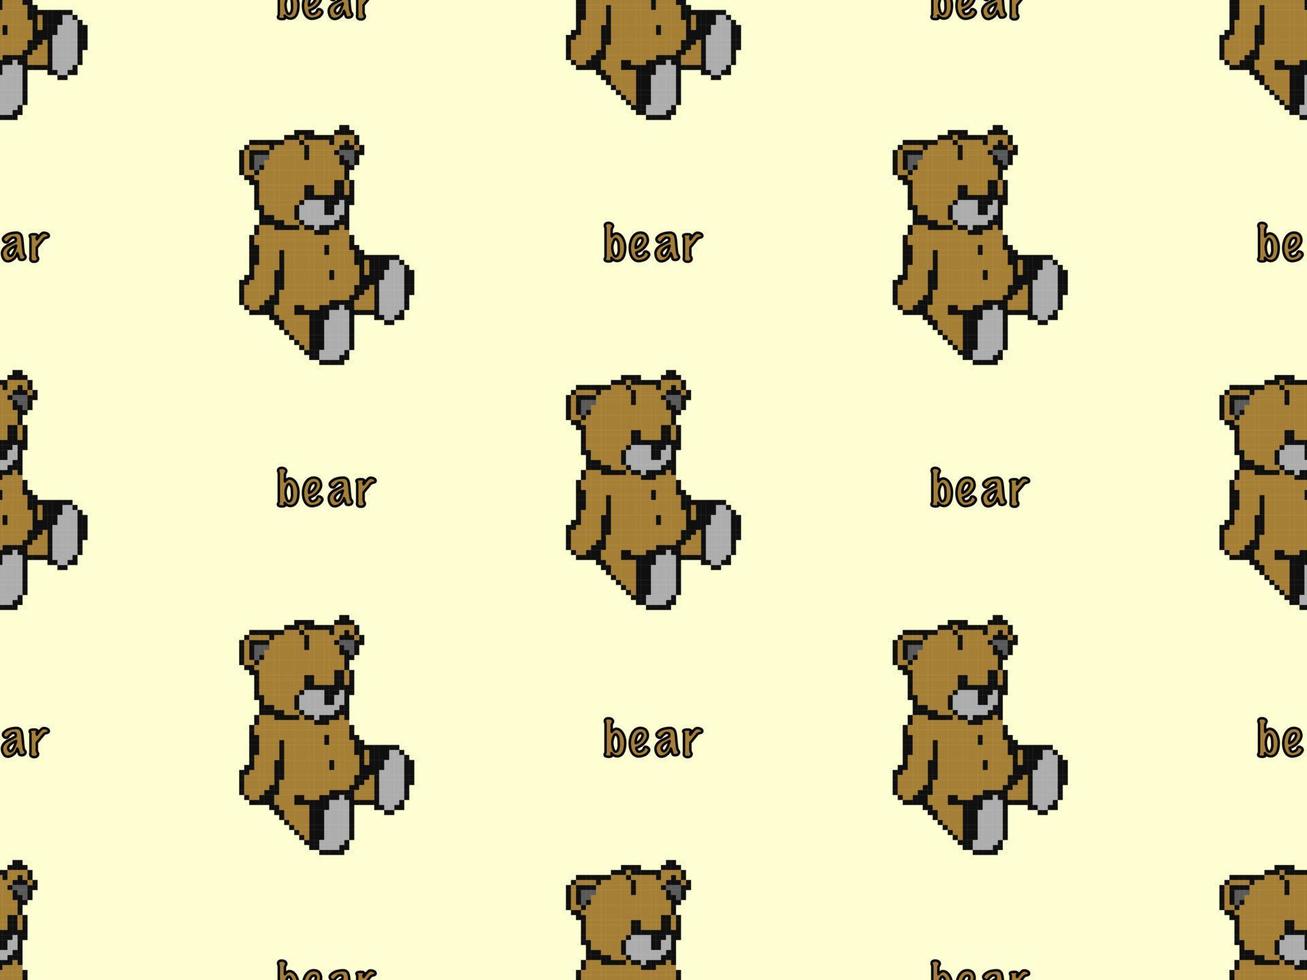 Bear cartoon character seamless pattern on yellow background.Pixel style vector